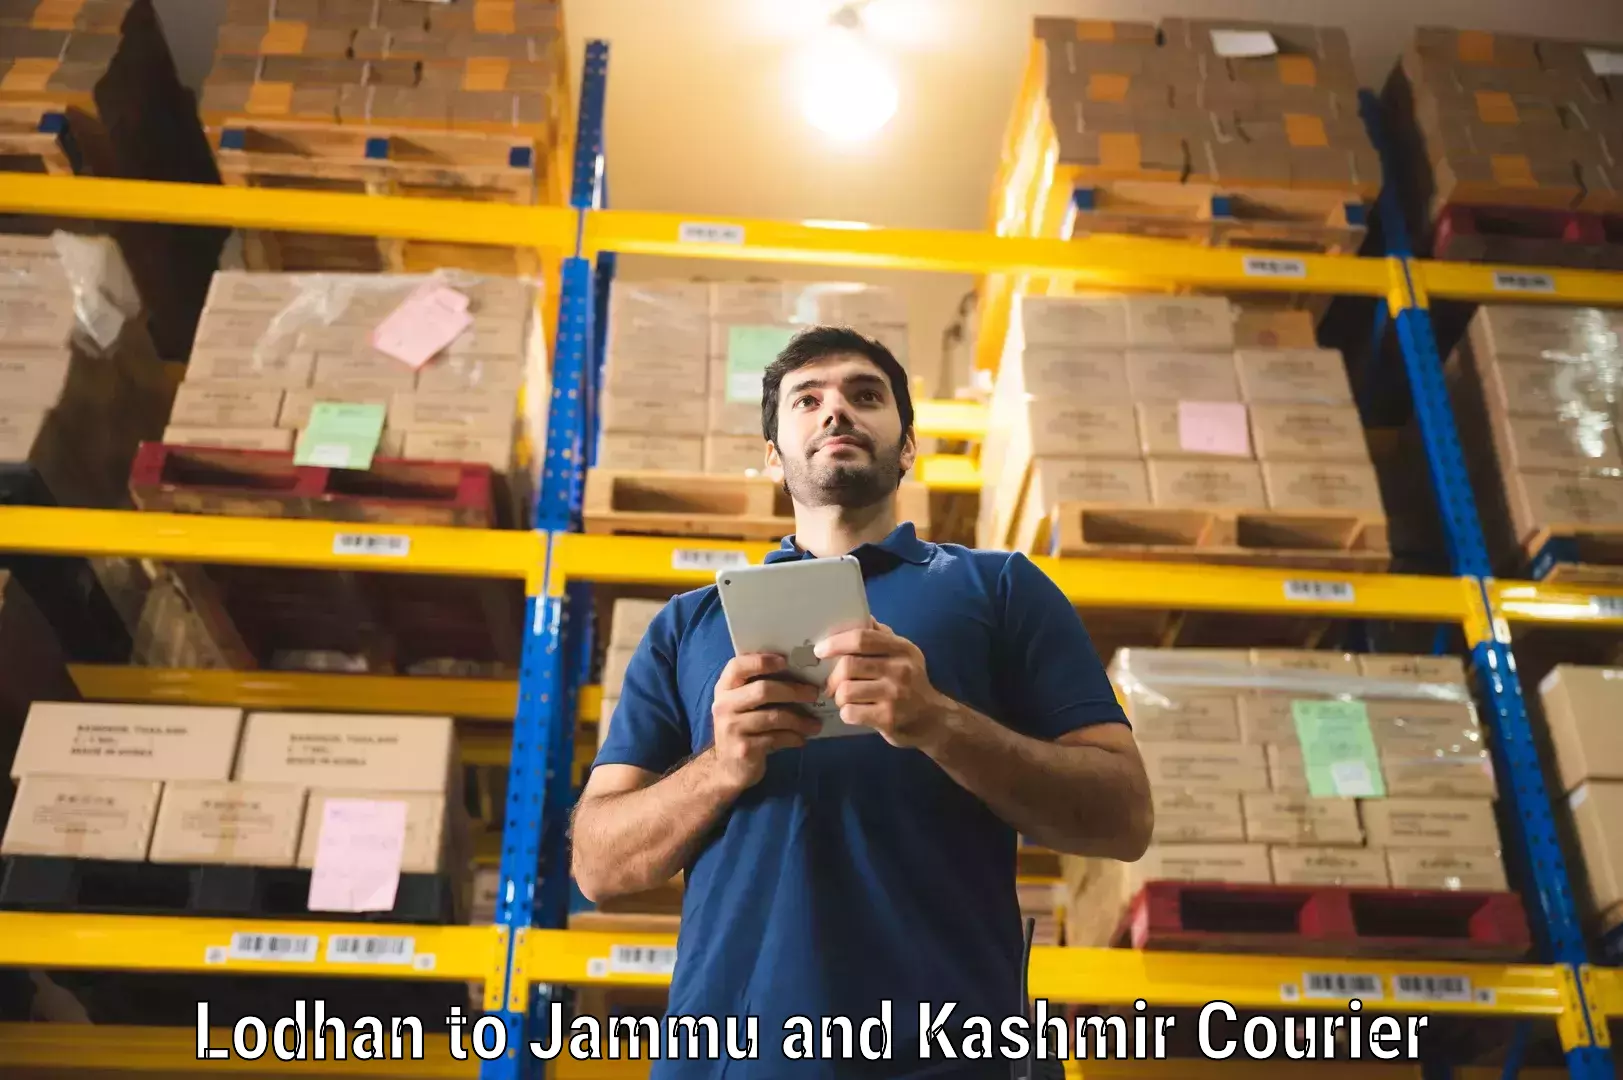 On-call courier service Lodhan to Jammu and Kashmir